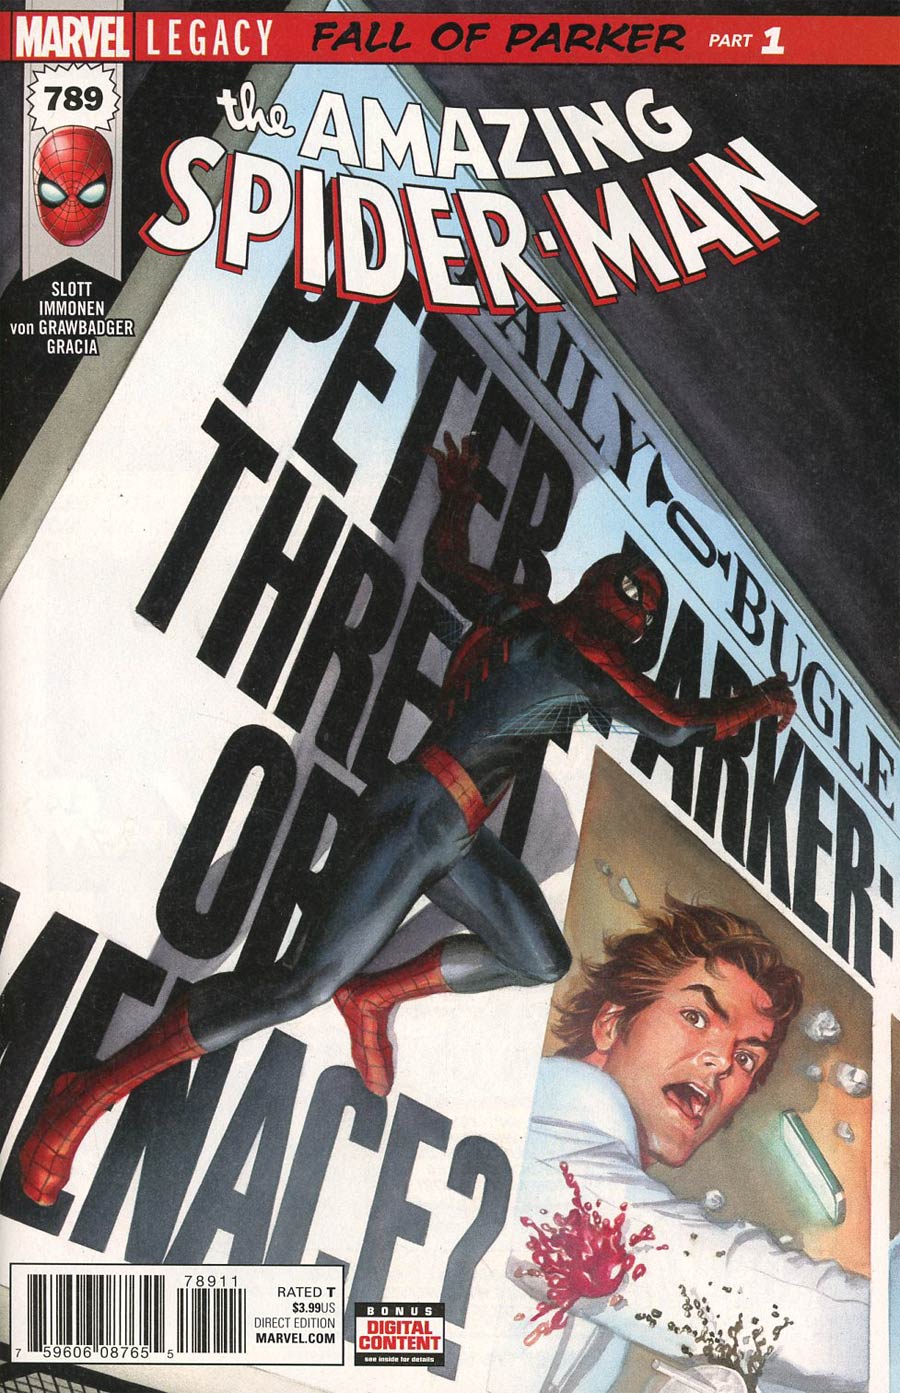 Amazing Spider-Man Vol 4 #789 Cover A 1st Ptg Regular Alex Ross Cover (Marvel Legacy Tie-In)